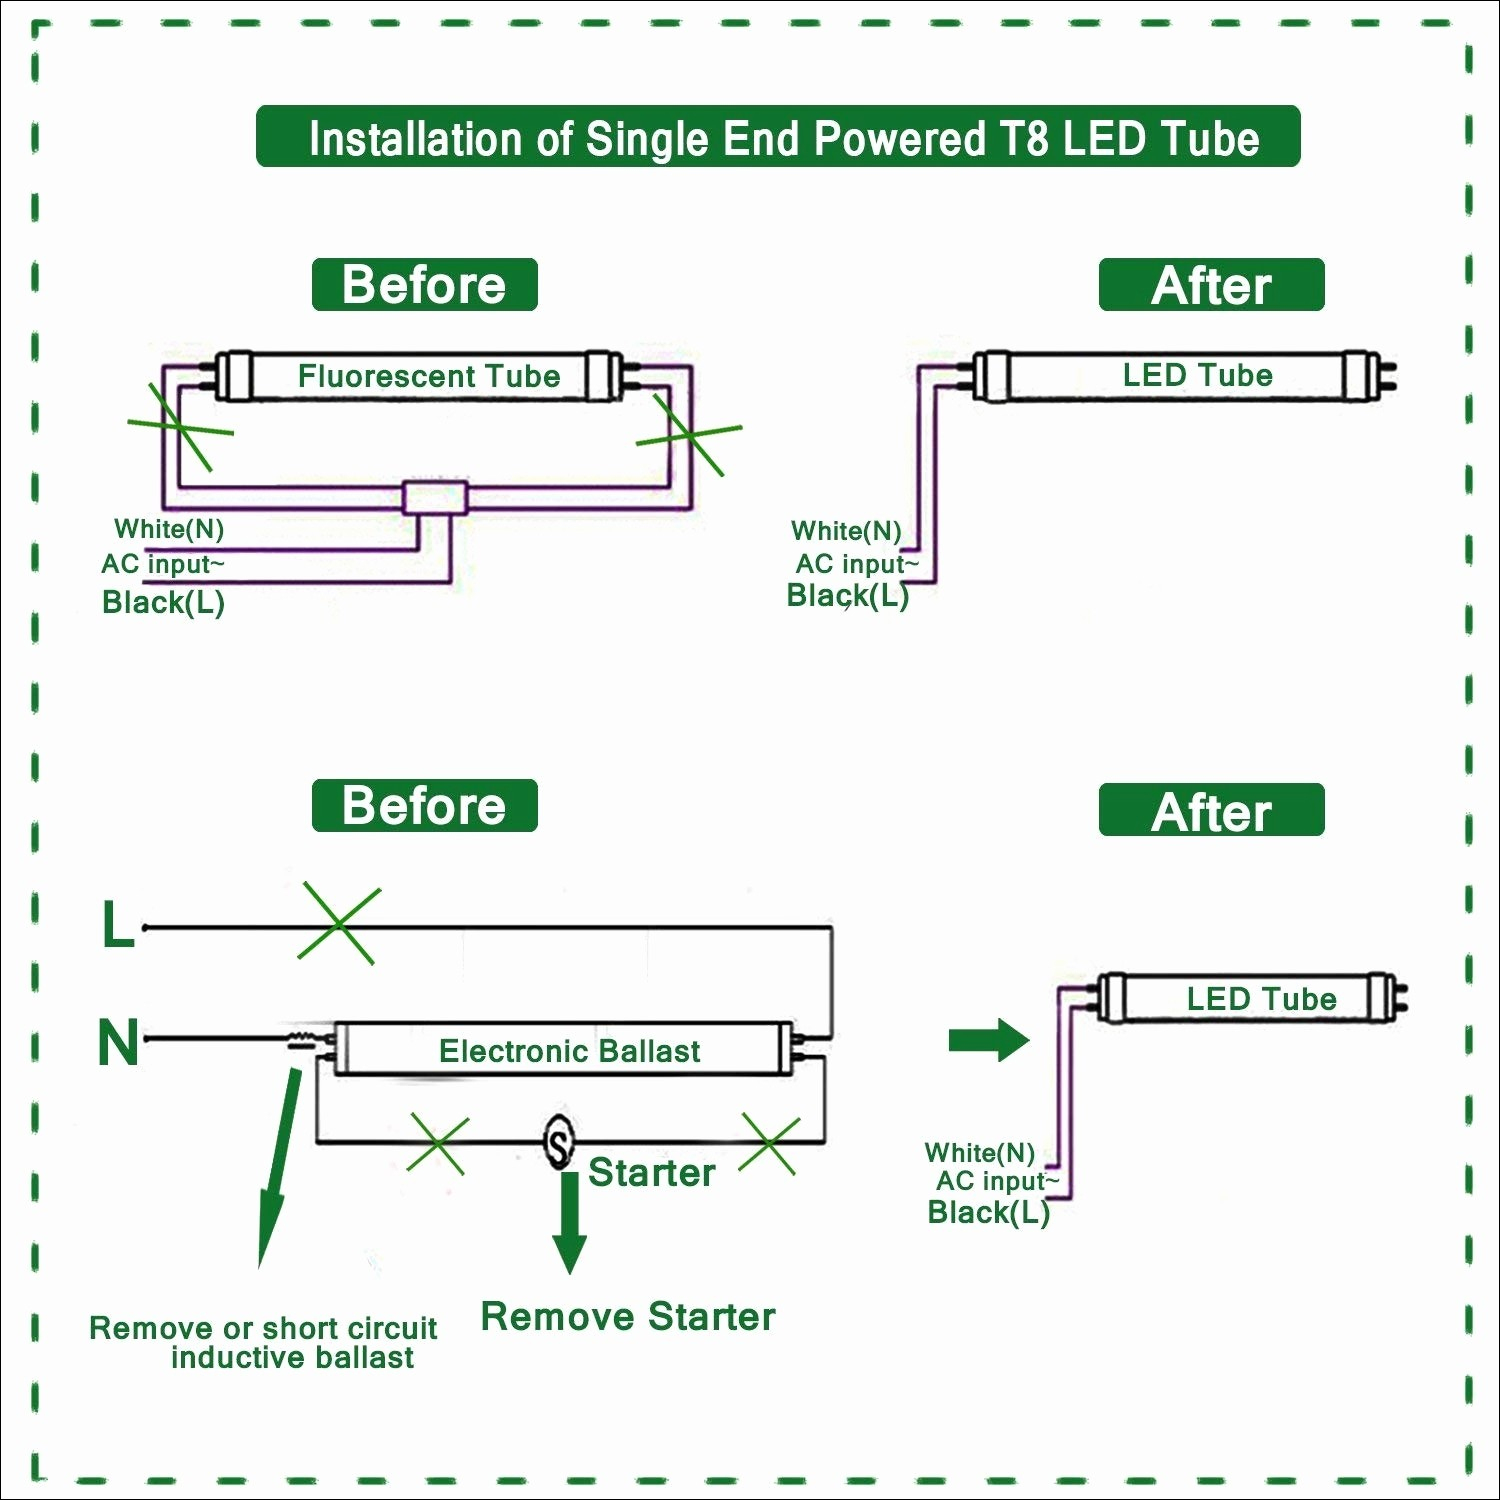 Led Fluorescent Replacement Wiring Diagram | Wiring Diagram - 2 Lamp T8 Ballast Wiring Diagram